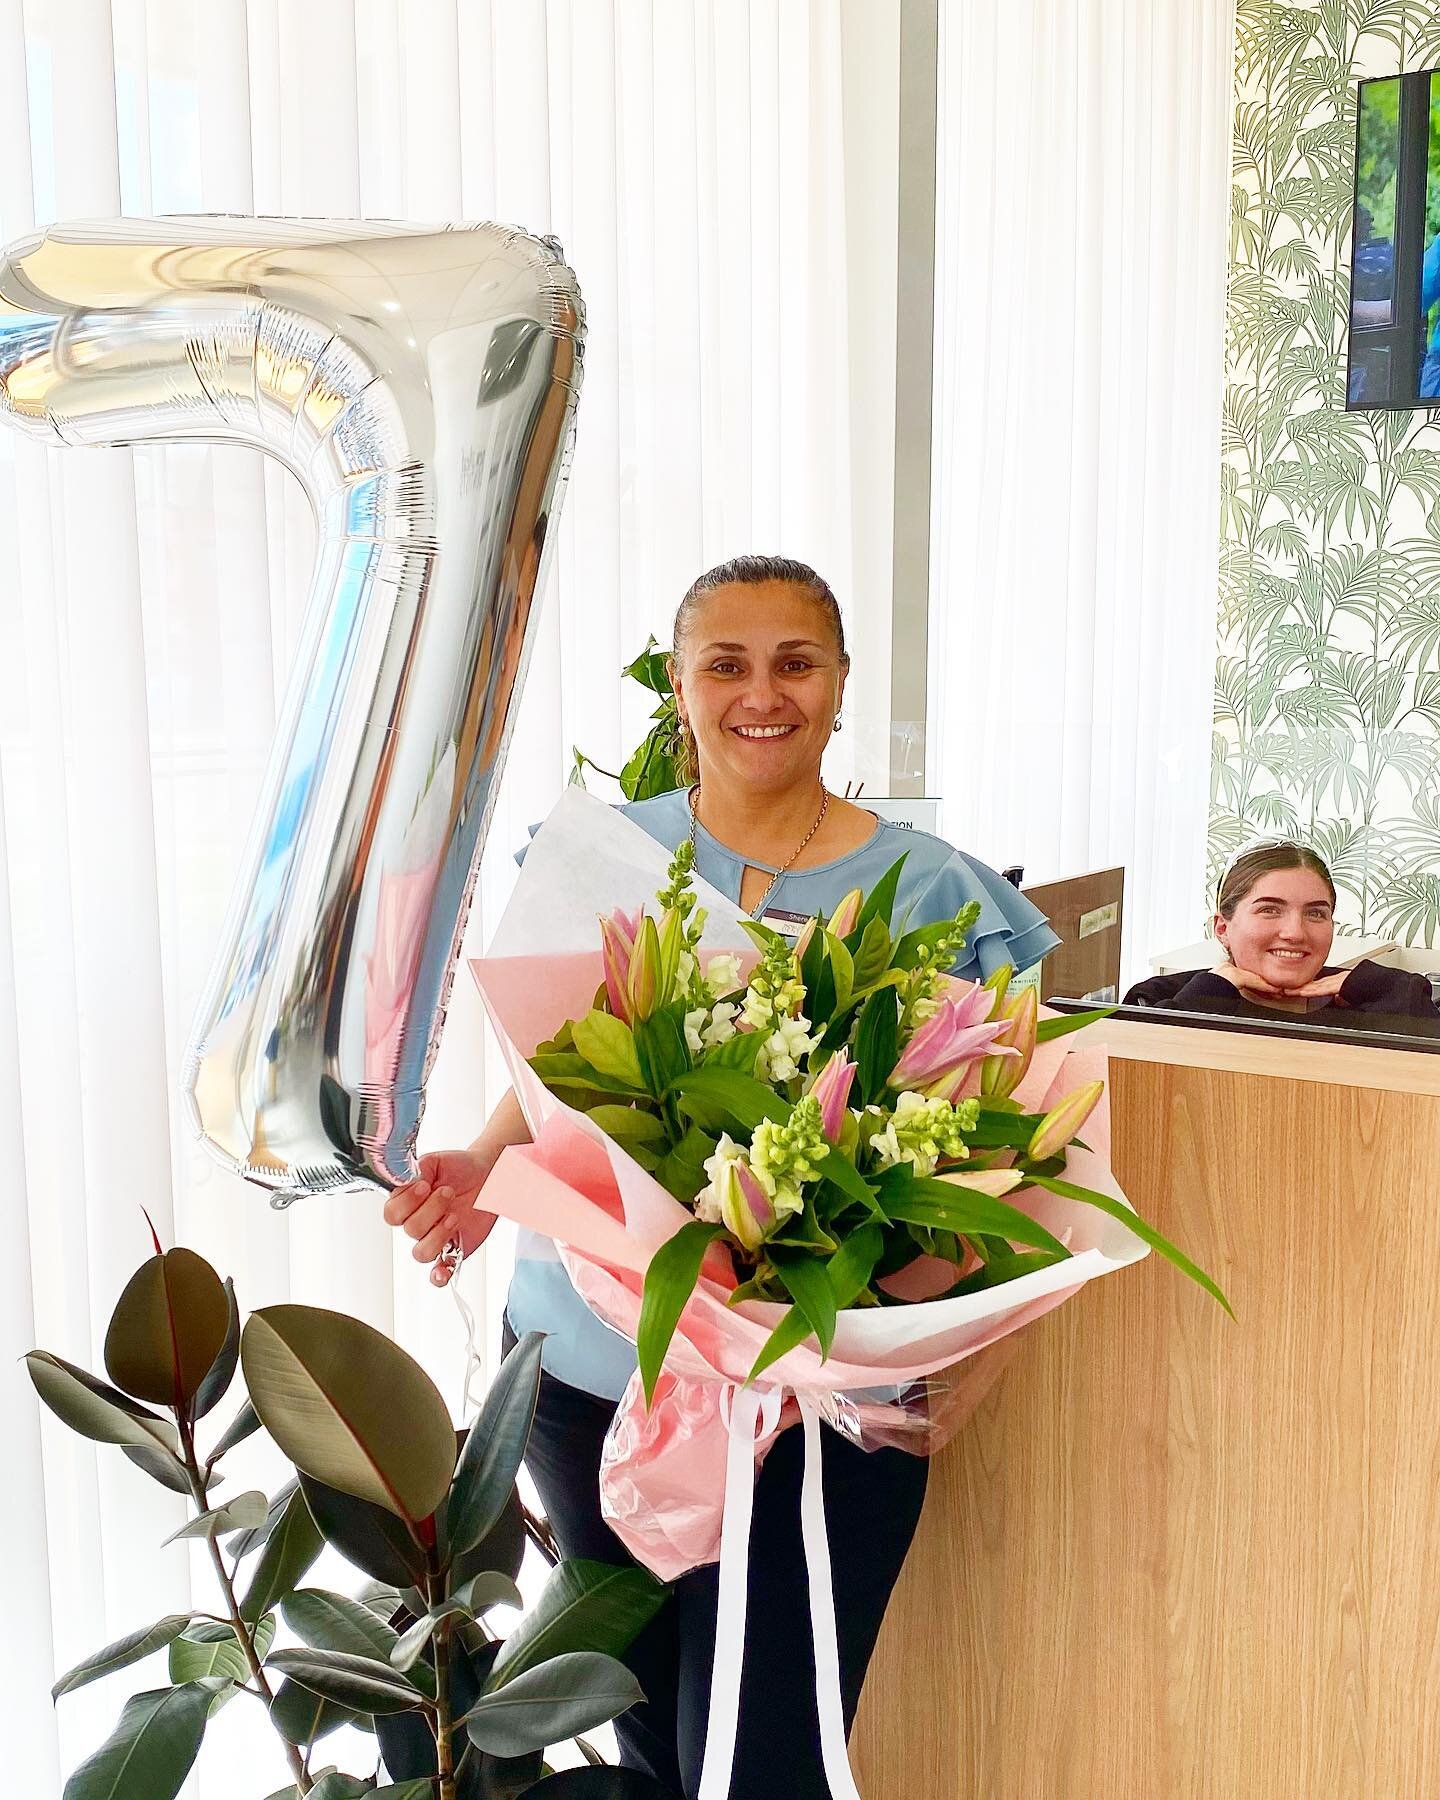 💐What a pretty surprise from Dr Peter Foo and his team from The Orthodontist (Gosford), warmly and joyfully delivered to us by the lovely Theresa! 💐

Thanks for the well wishes to mark our 7 years of New Leaf life and for being awesome at looking a